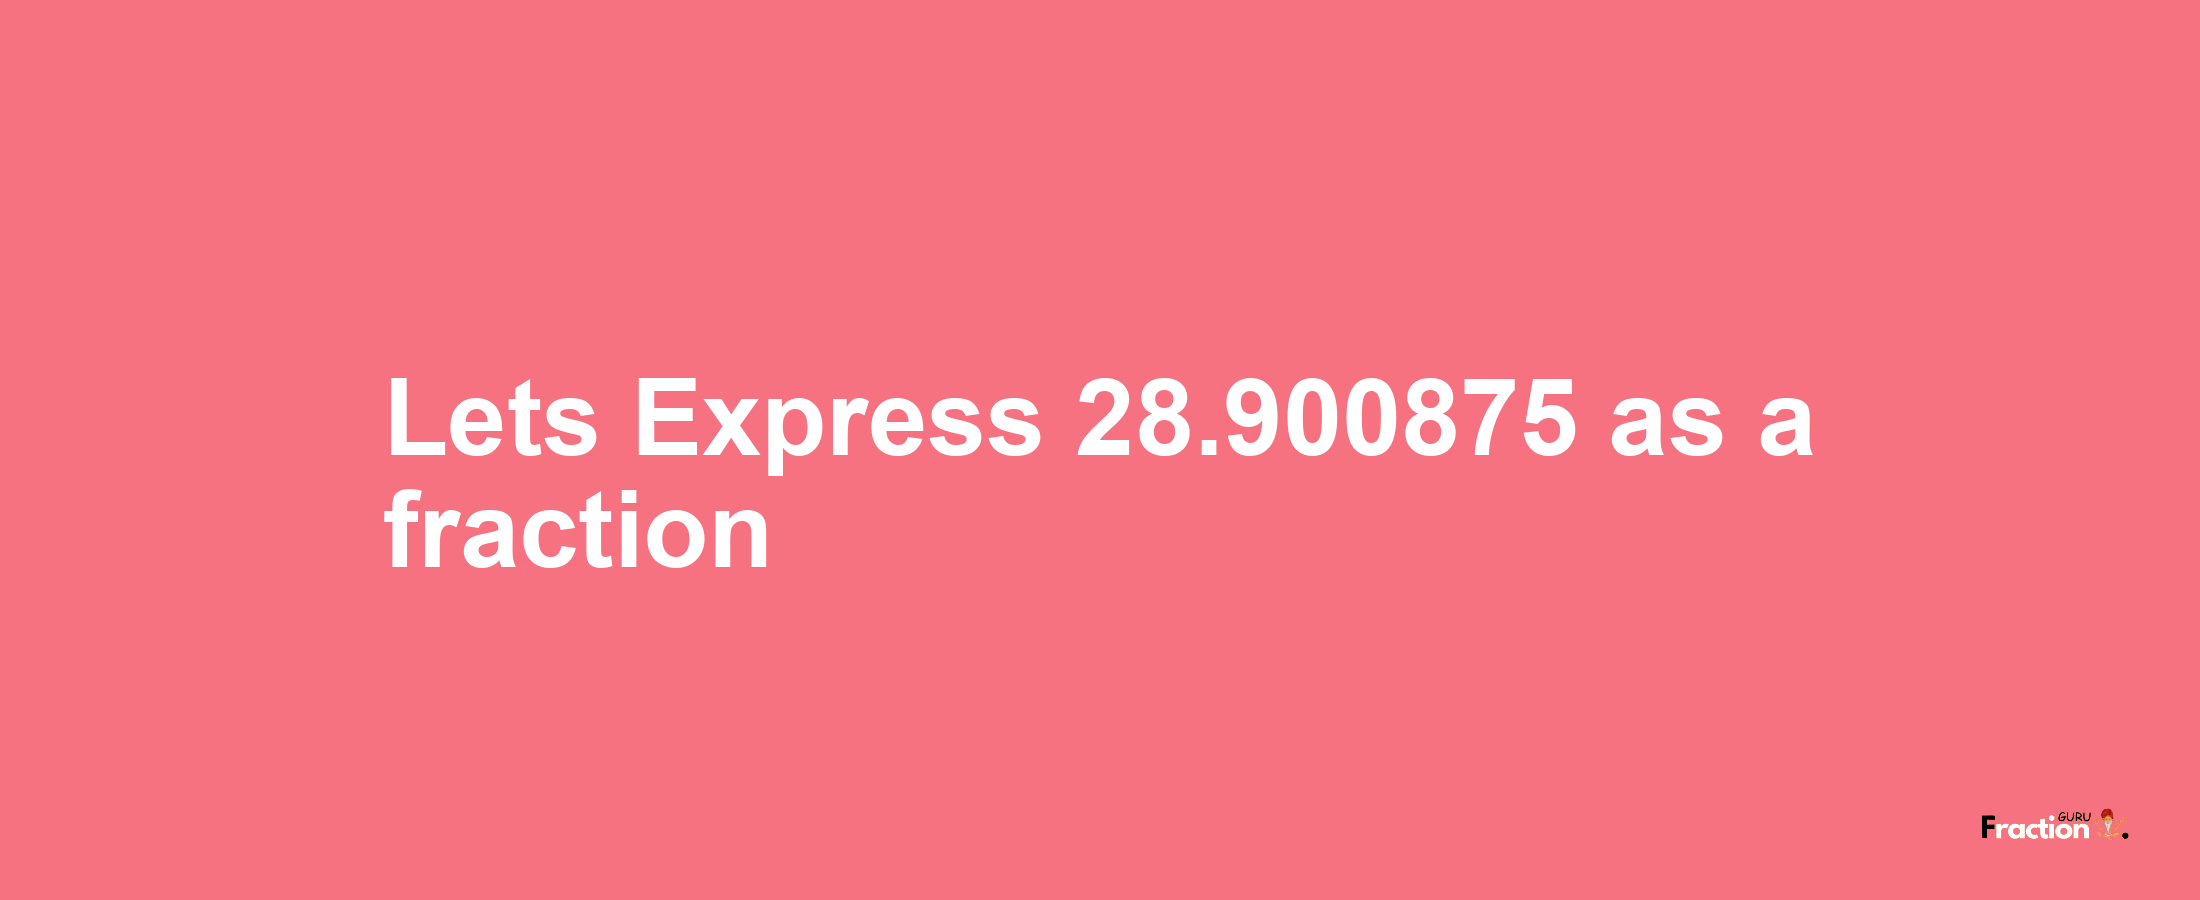 Lets Express 28.900875 as afraction